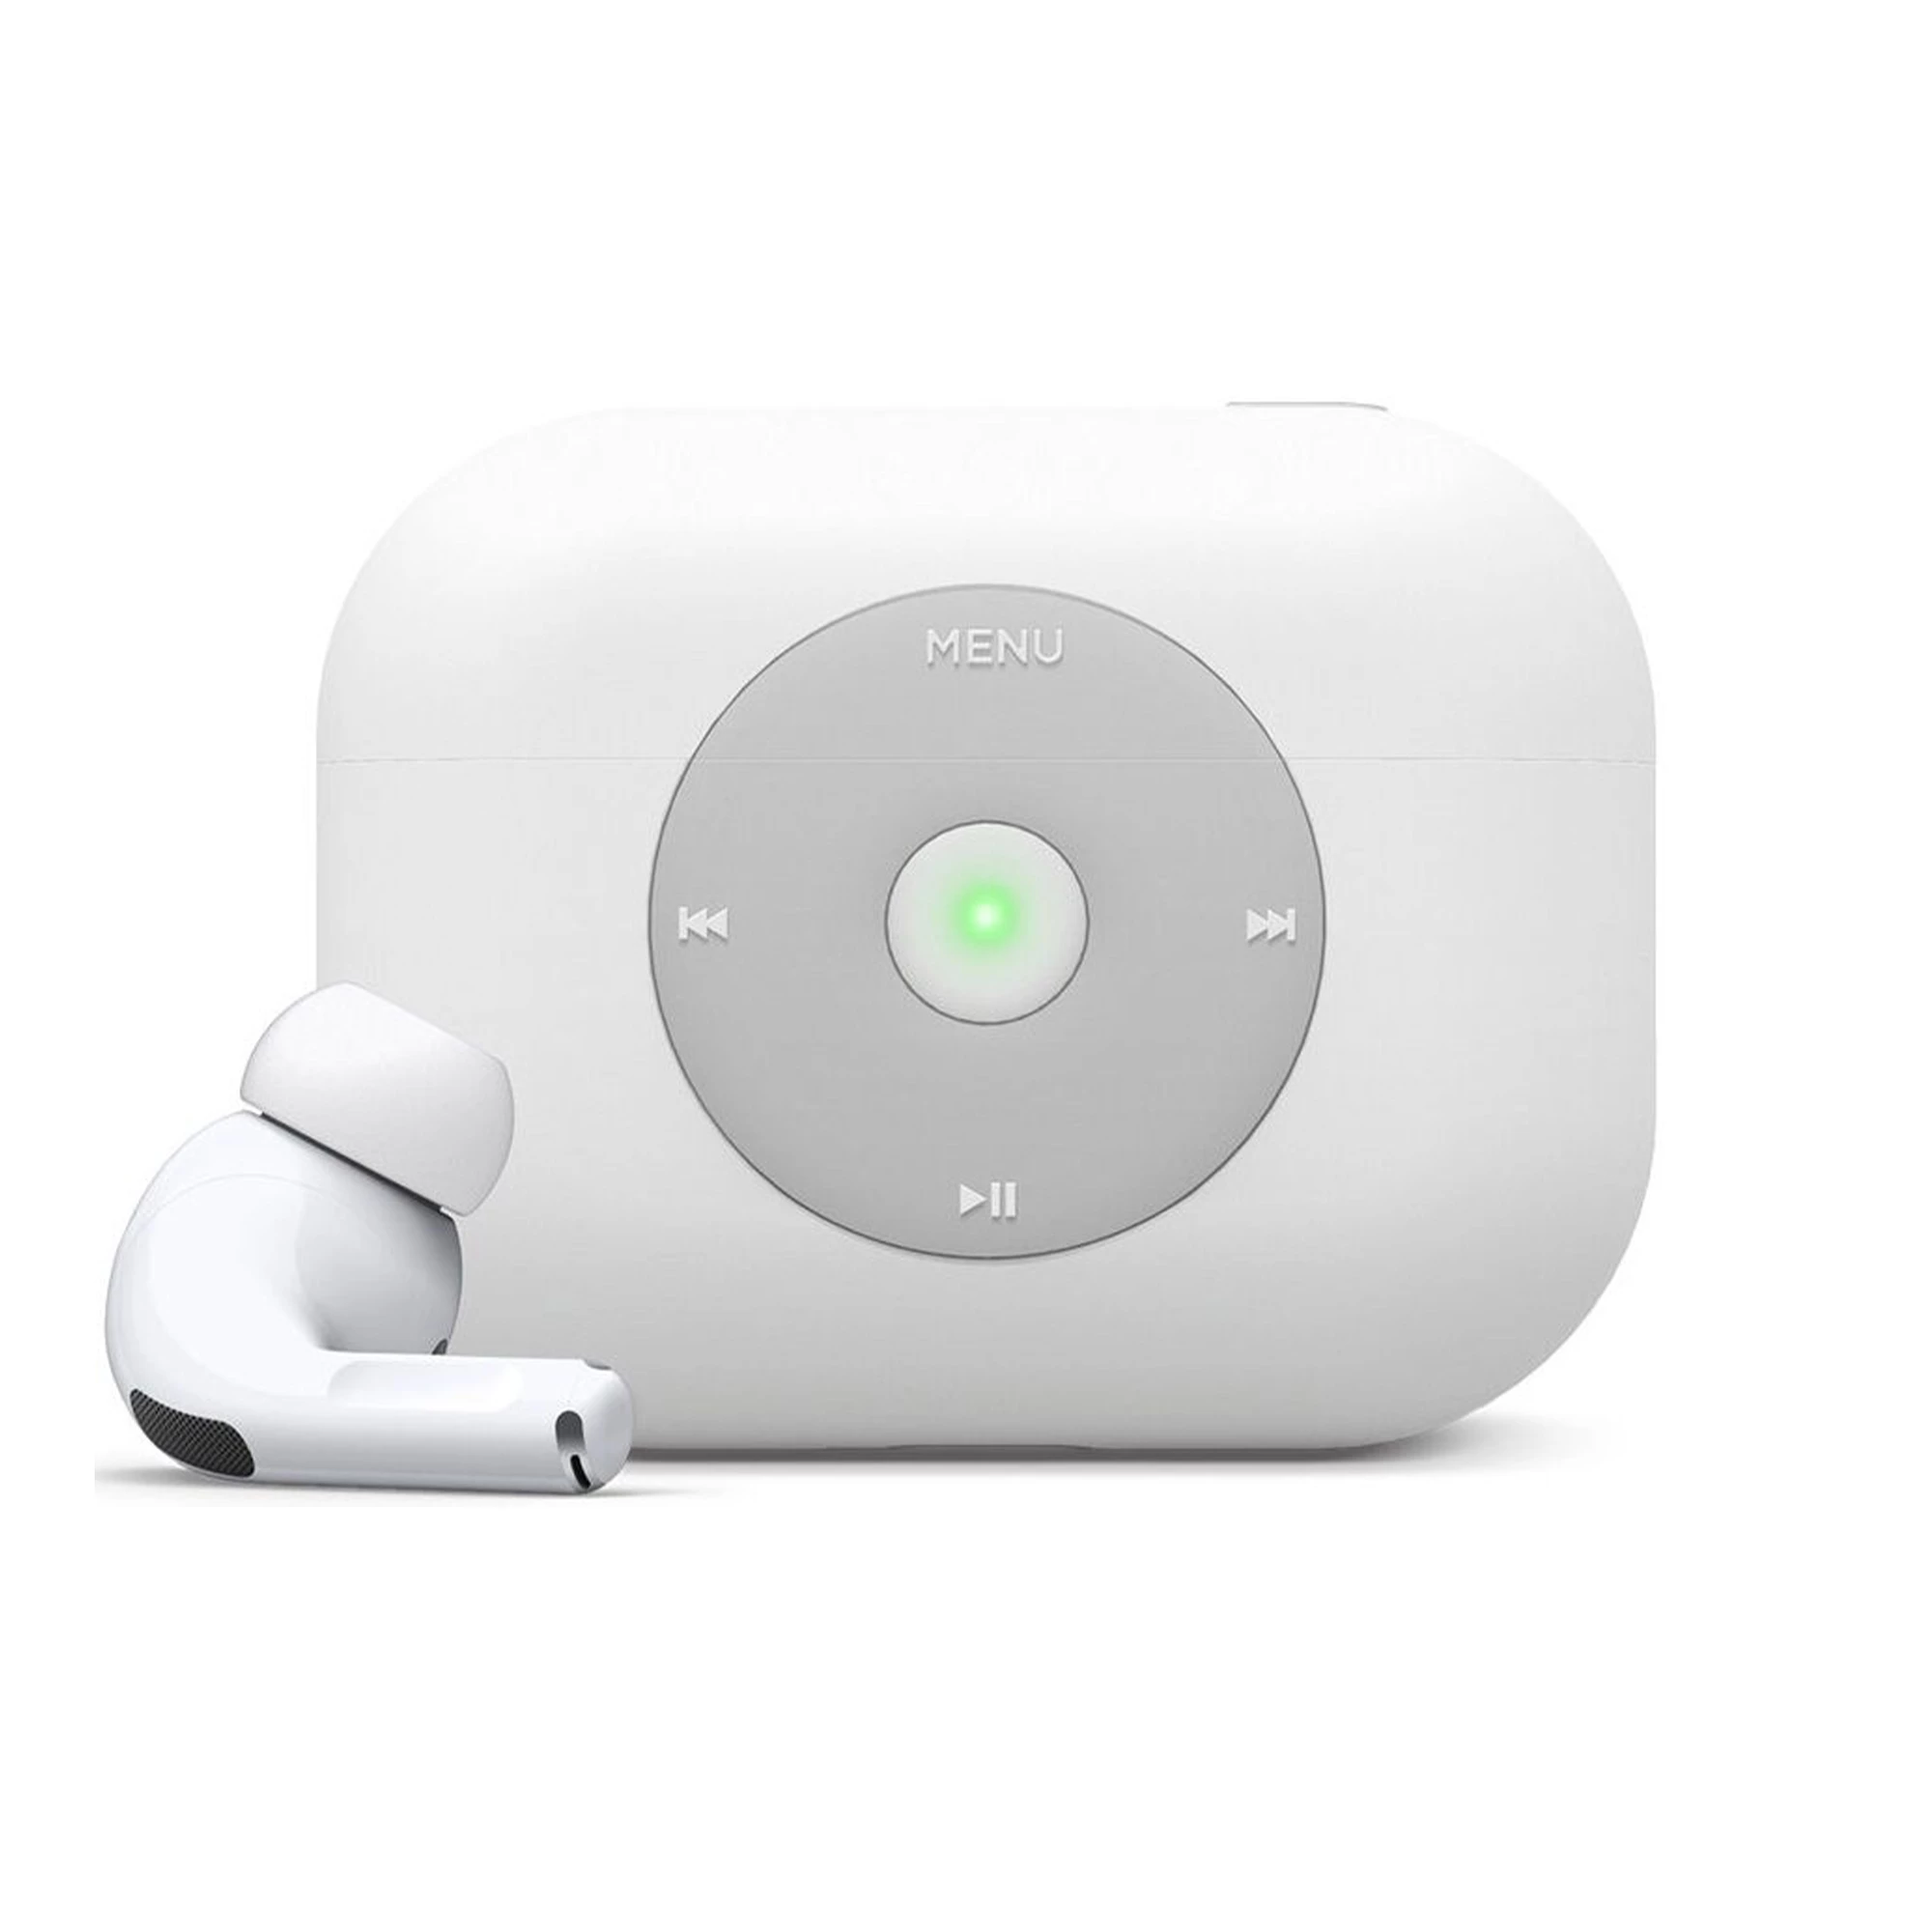 Elago AW6 Case for Airpods Pro - White (EAPPAW6-WH)